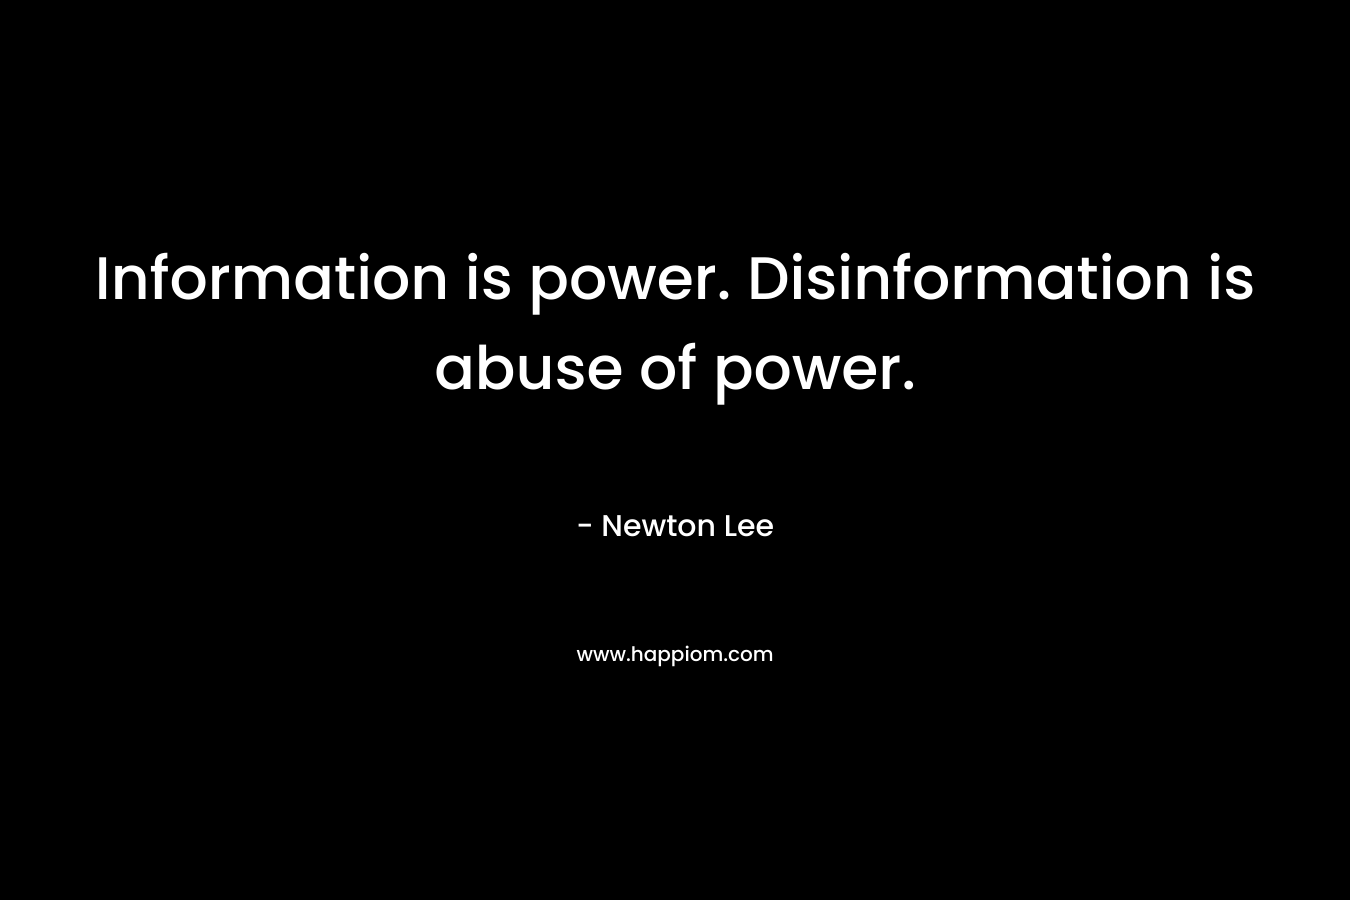 Information is power. Disinformation is abuse of power. – Newton Lee